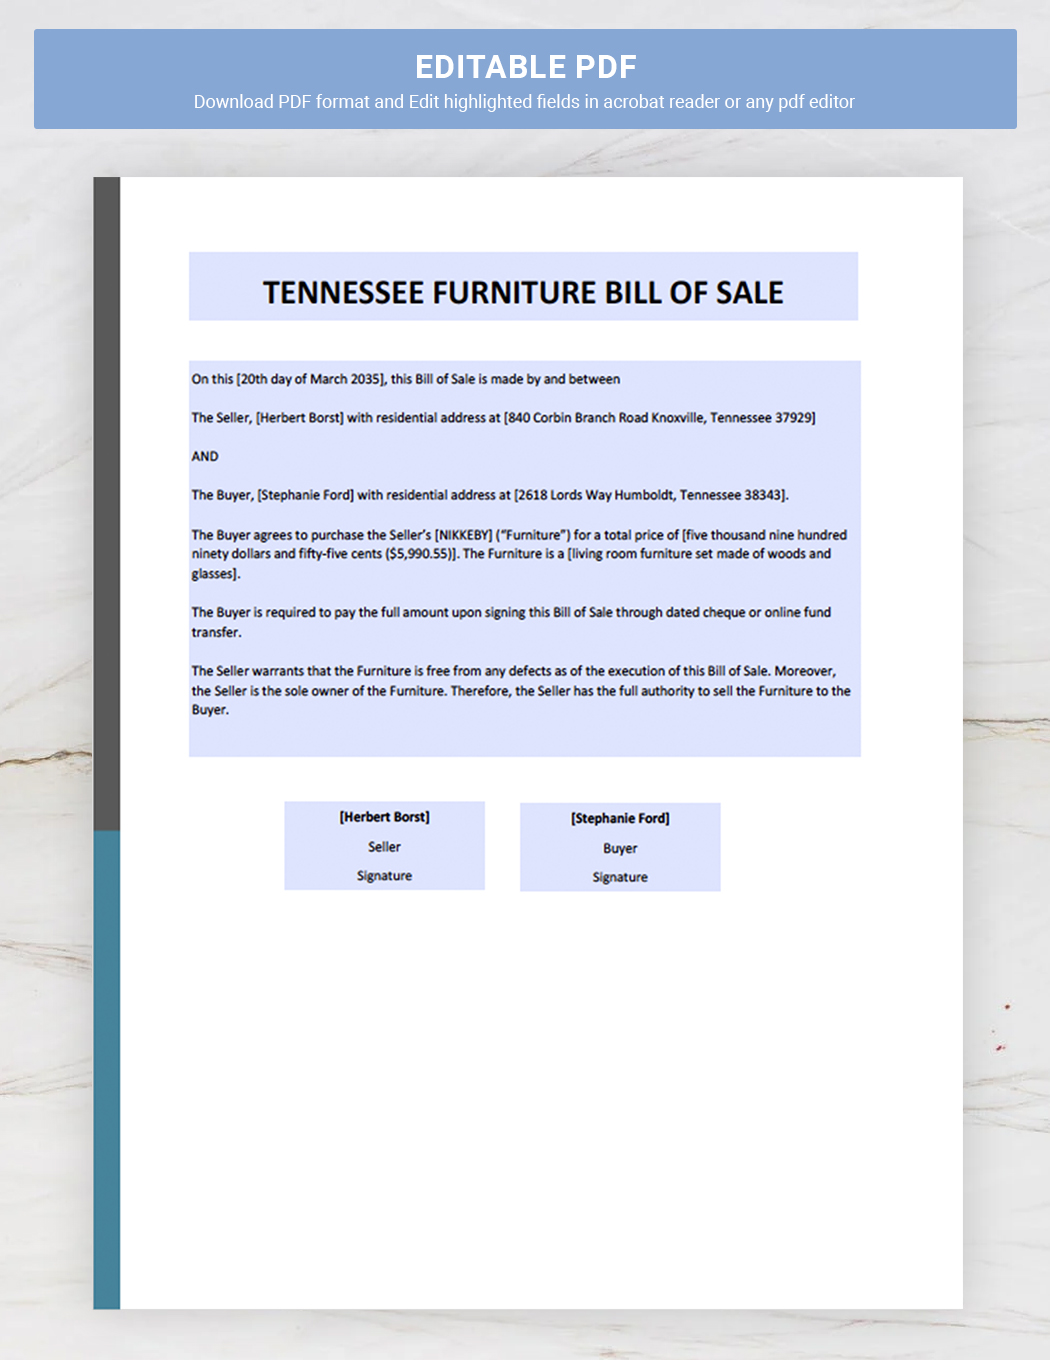 Tennessee Furniture Bill of Sale Template